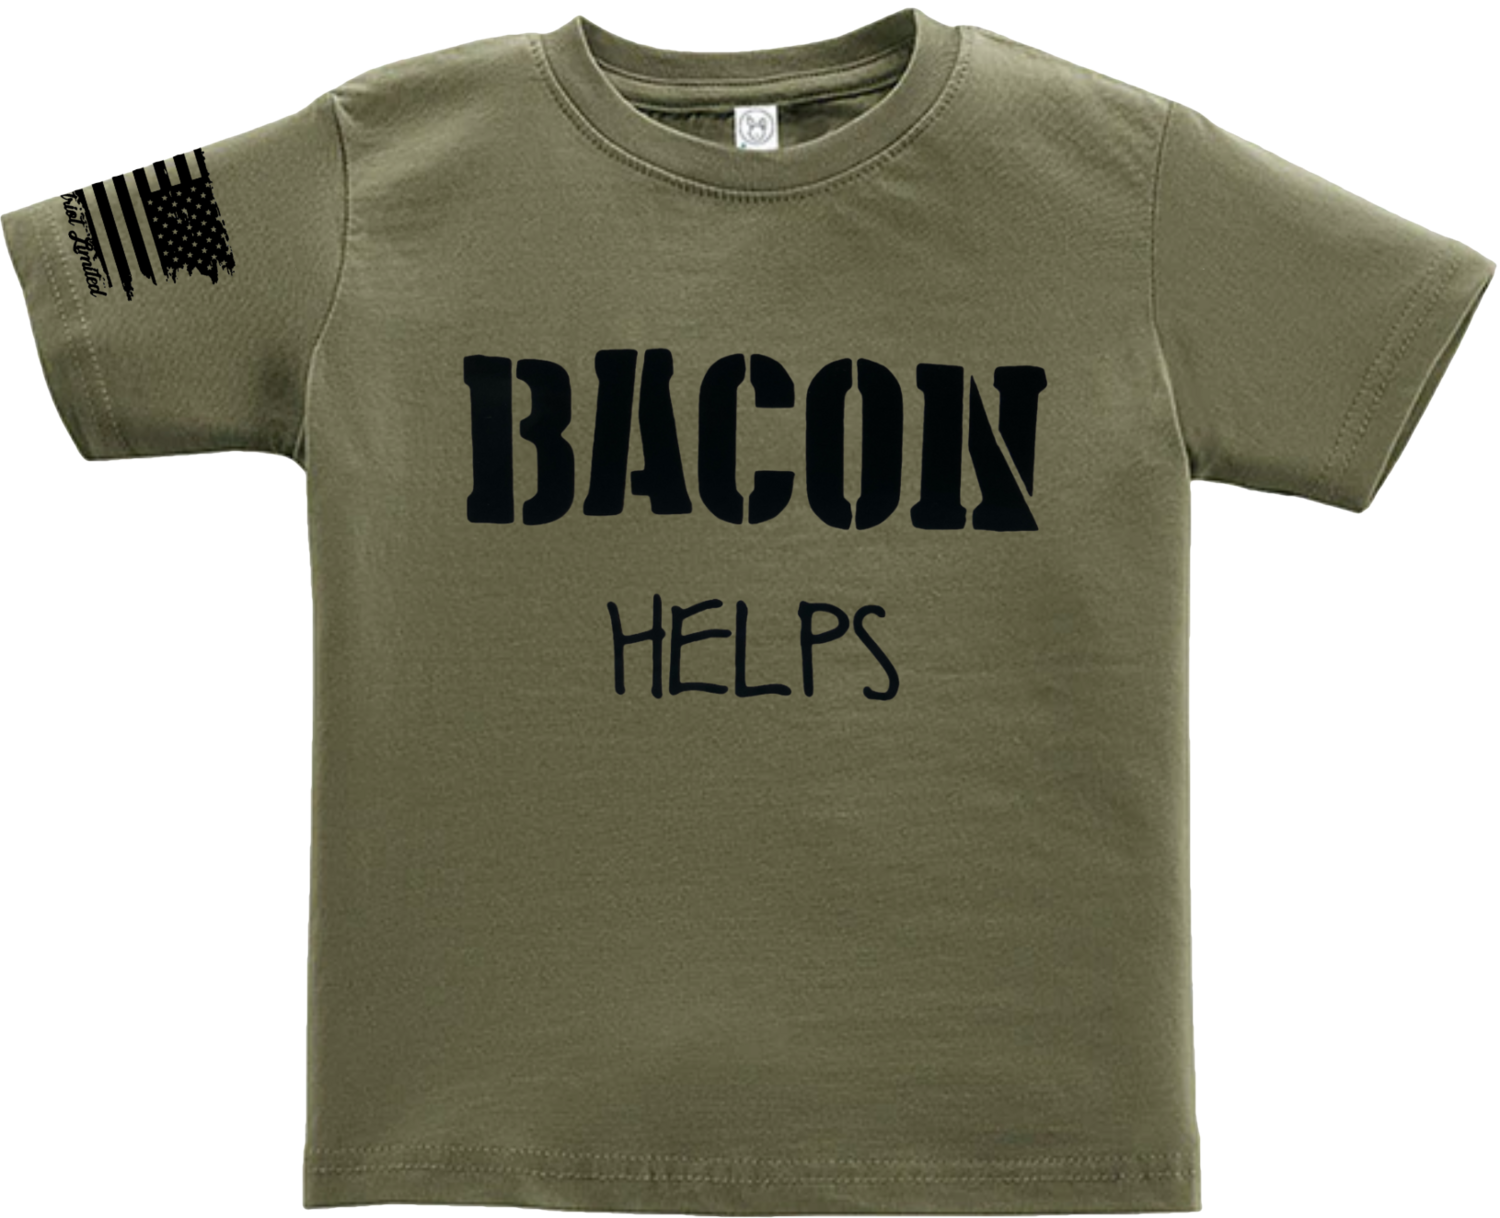 Bacon Helps Toddler S/S